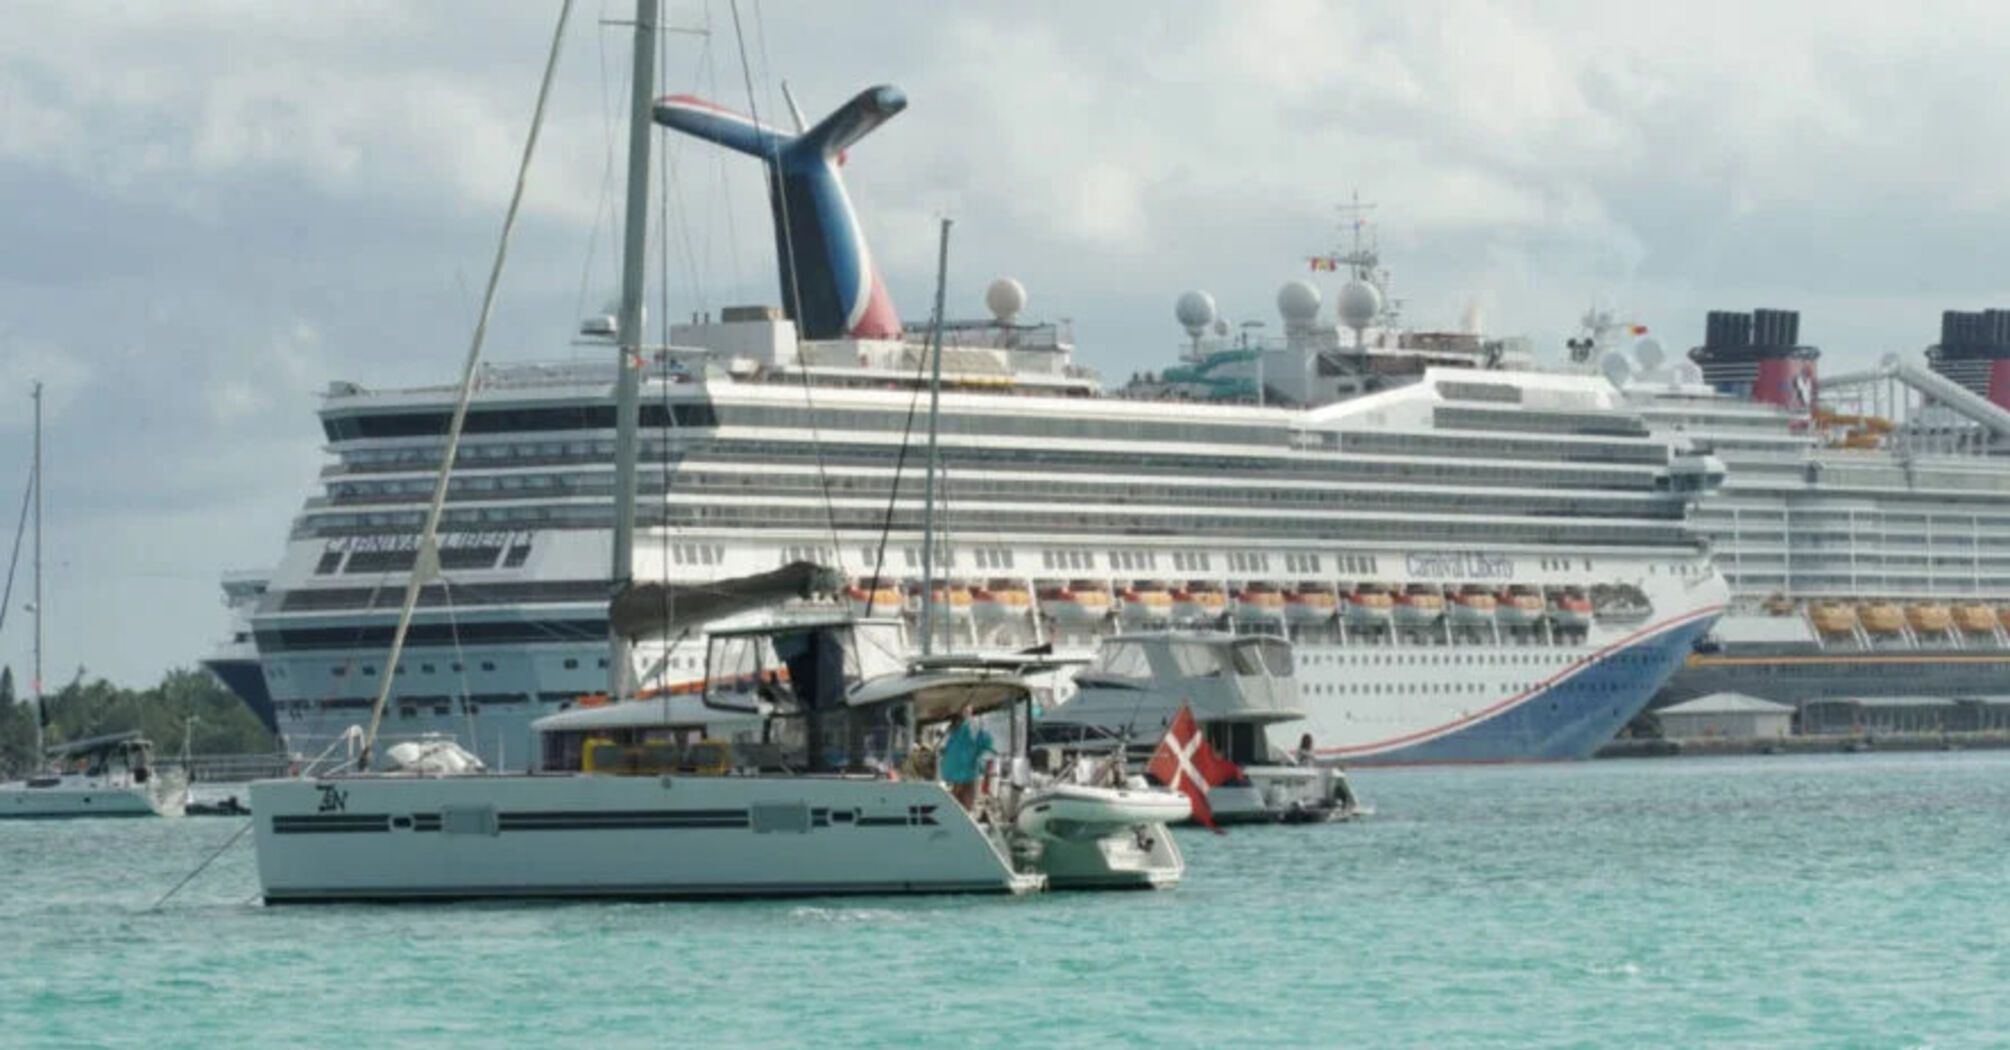 Royal Caribbean continues to cancel popular shore excursions. What is the reason?